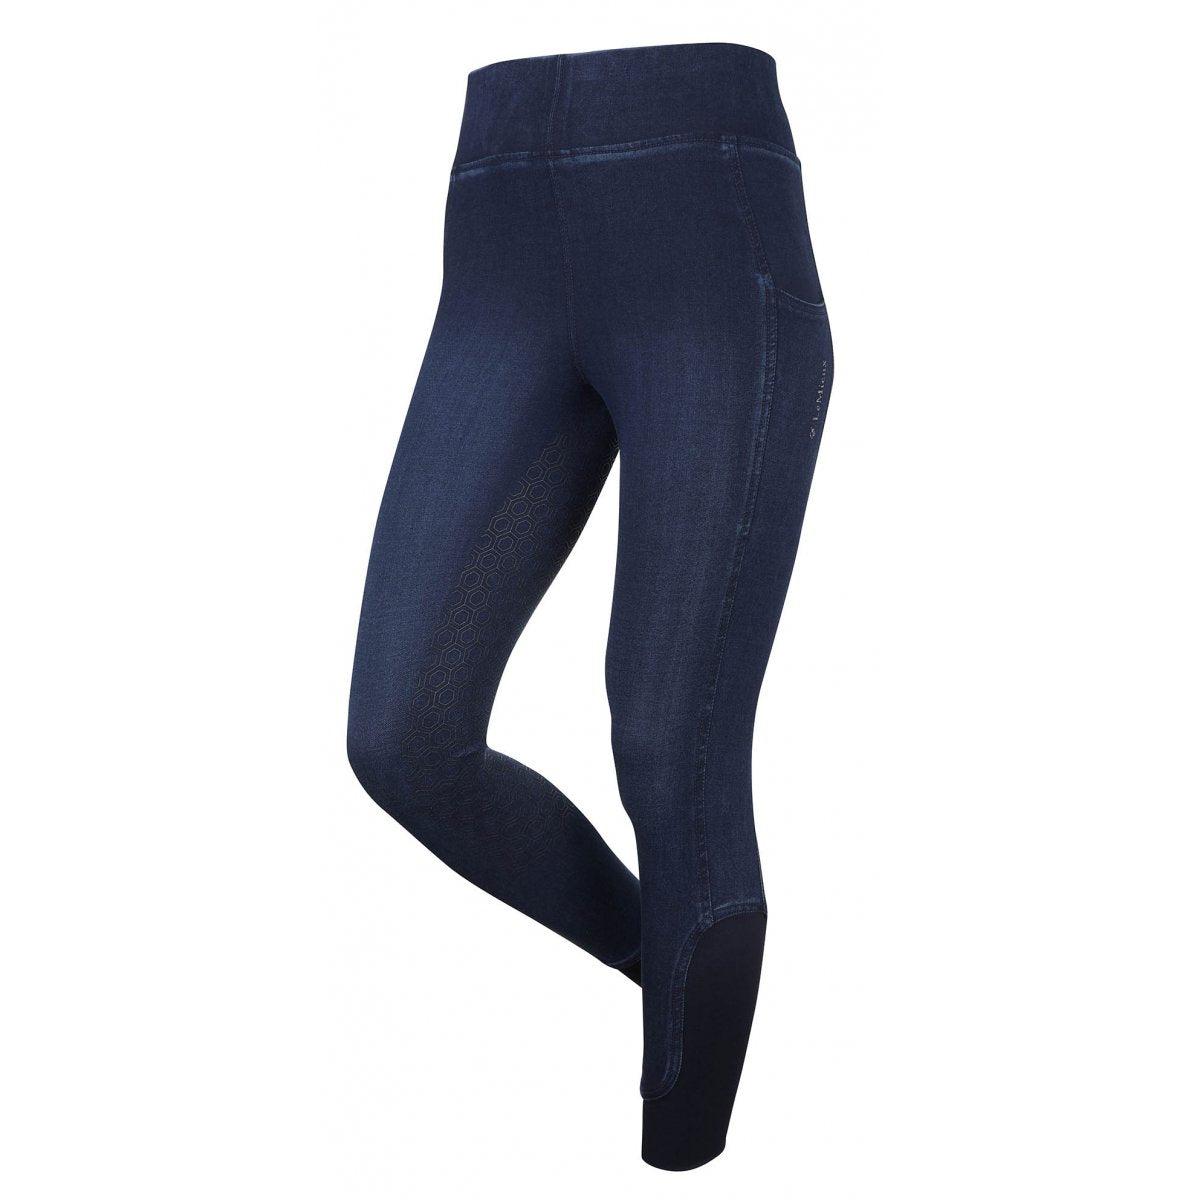 Navy horse riding tights with faux jean design, no model.